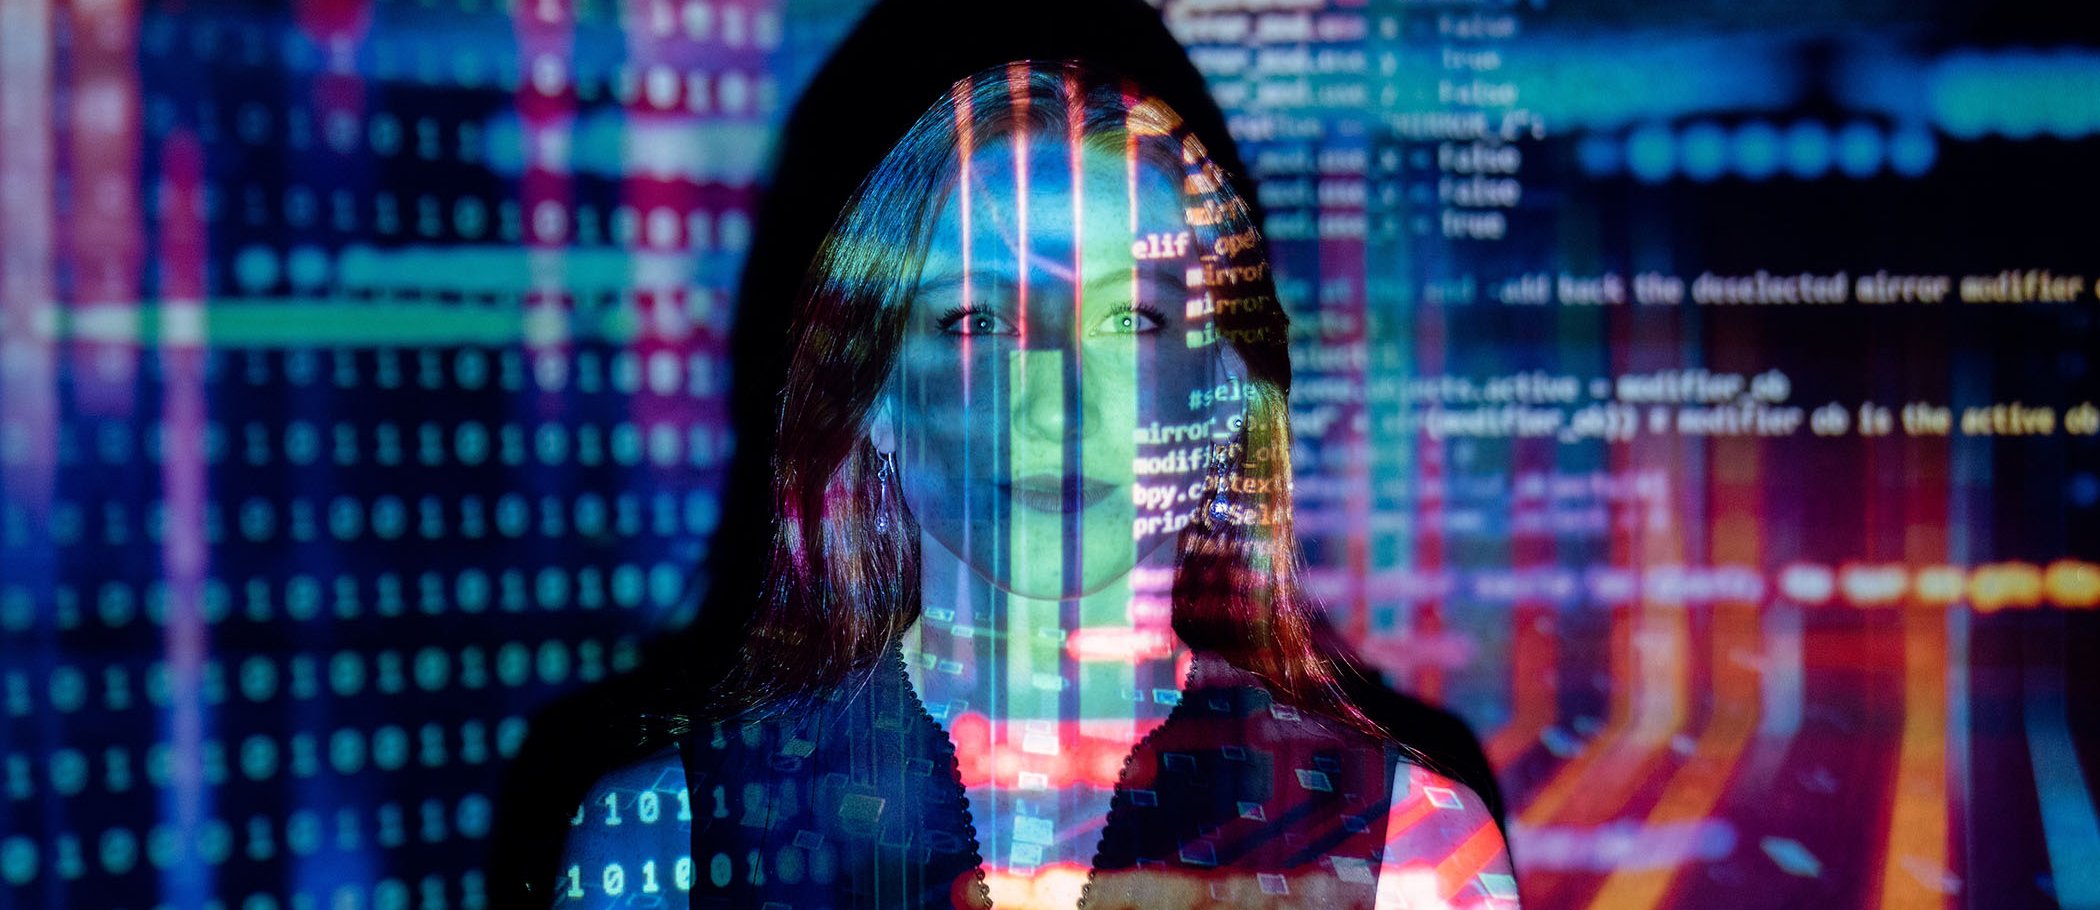 A woman in front of a wall with projections of source code and binary code